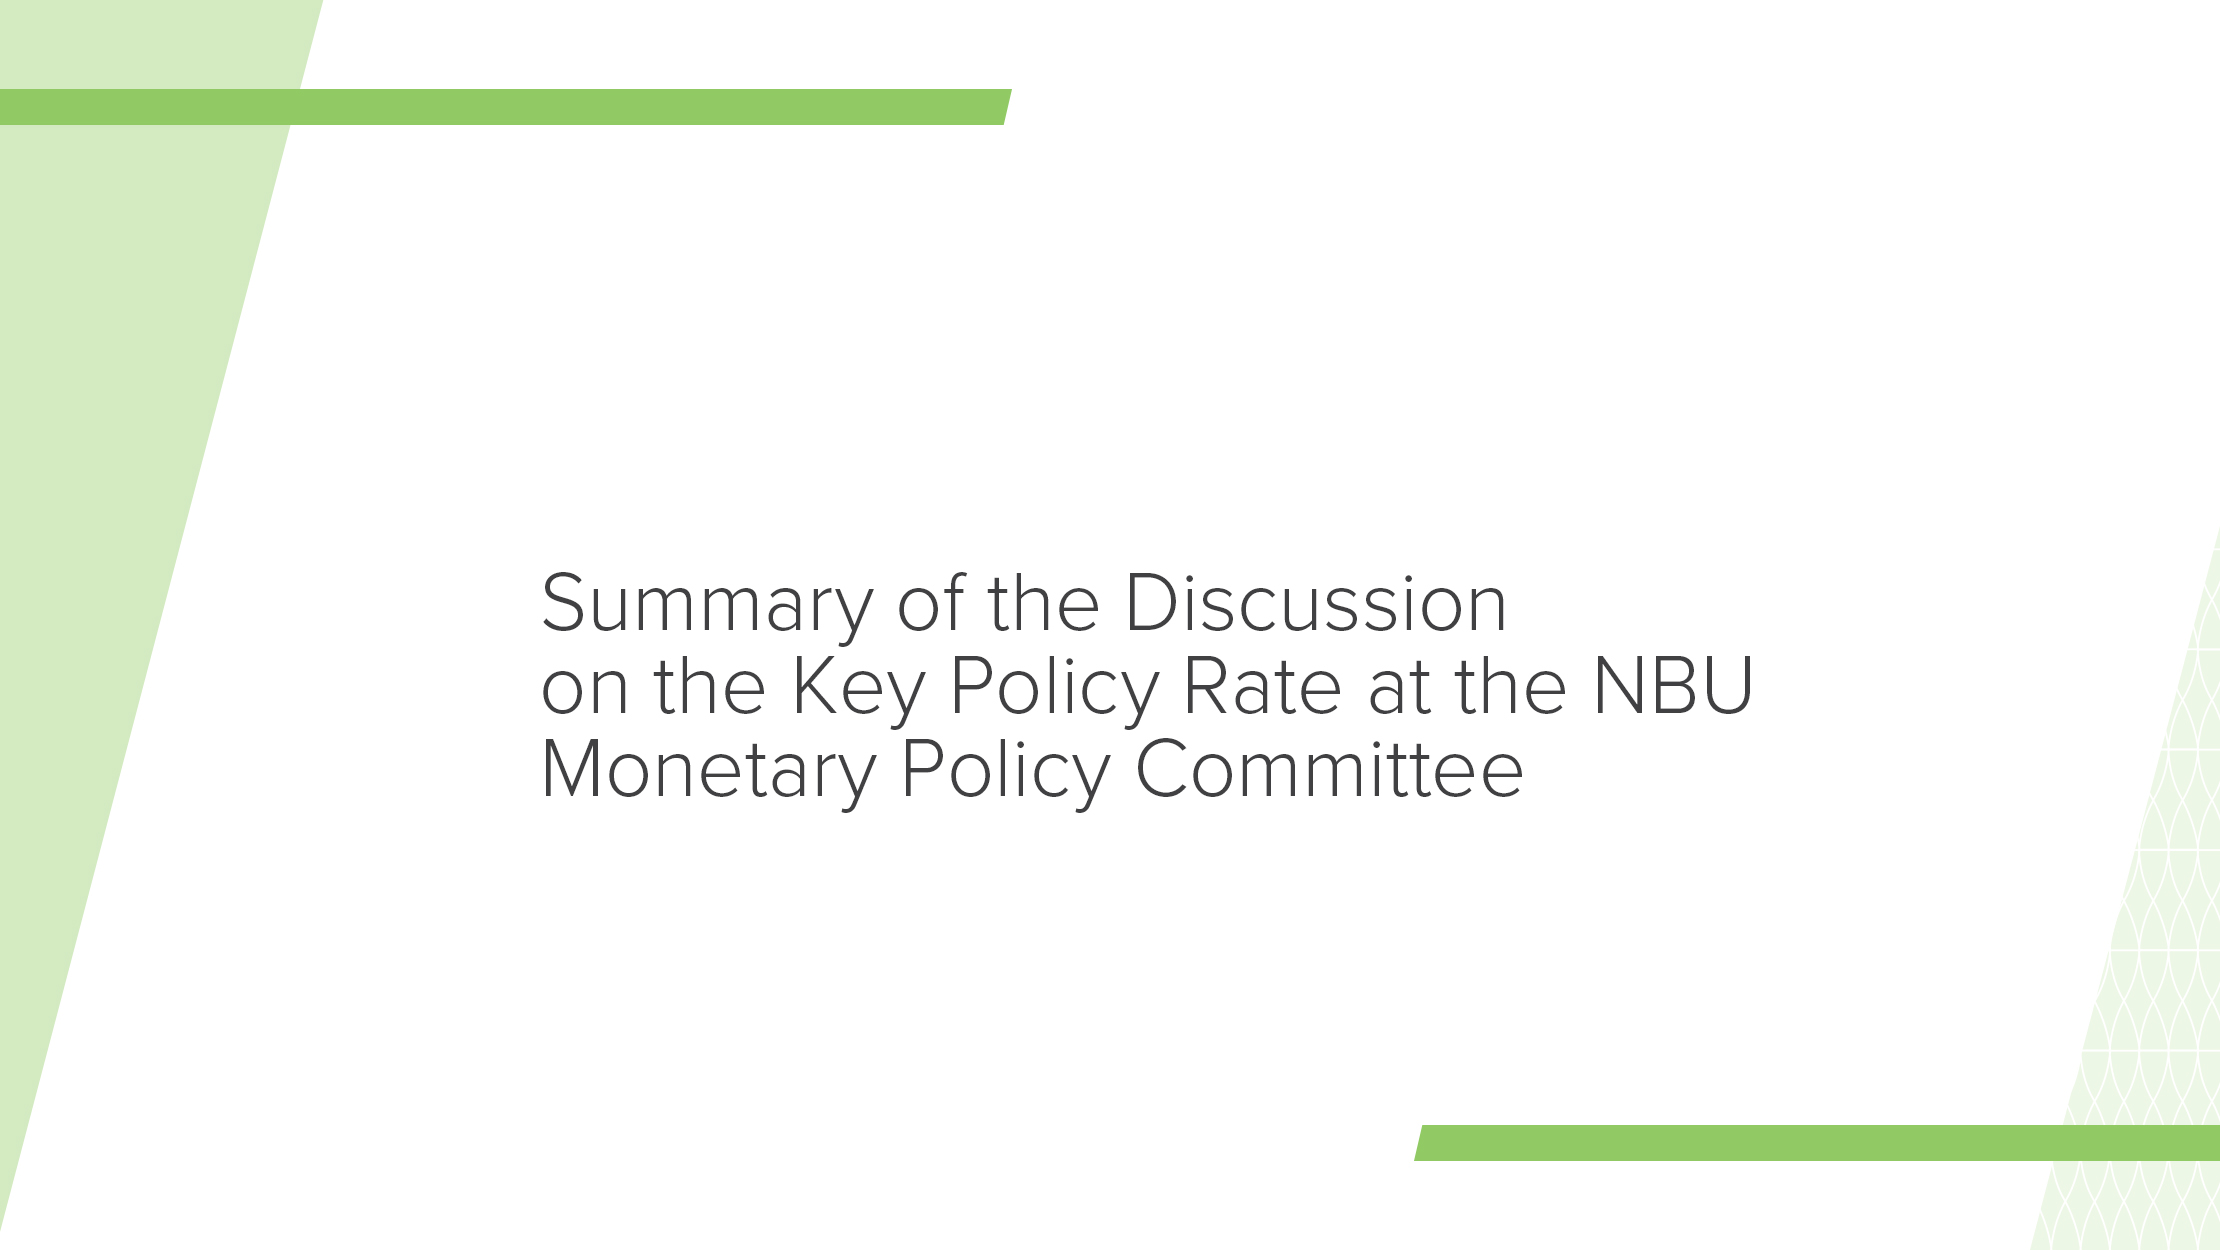 Summary of Key Policy Rate Discussion by NBU Monetary Policy Committee on 20 October 2021